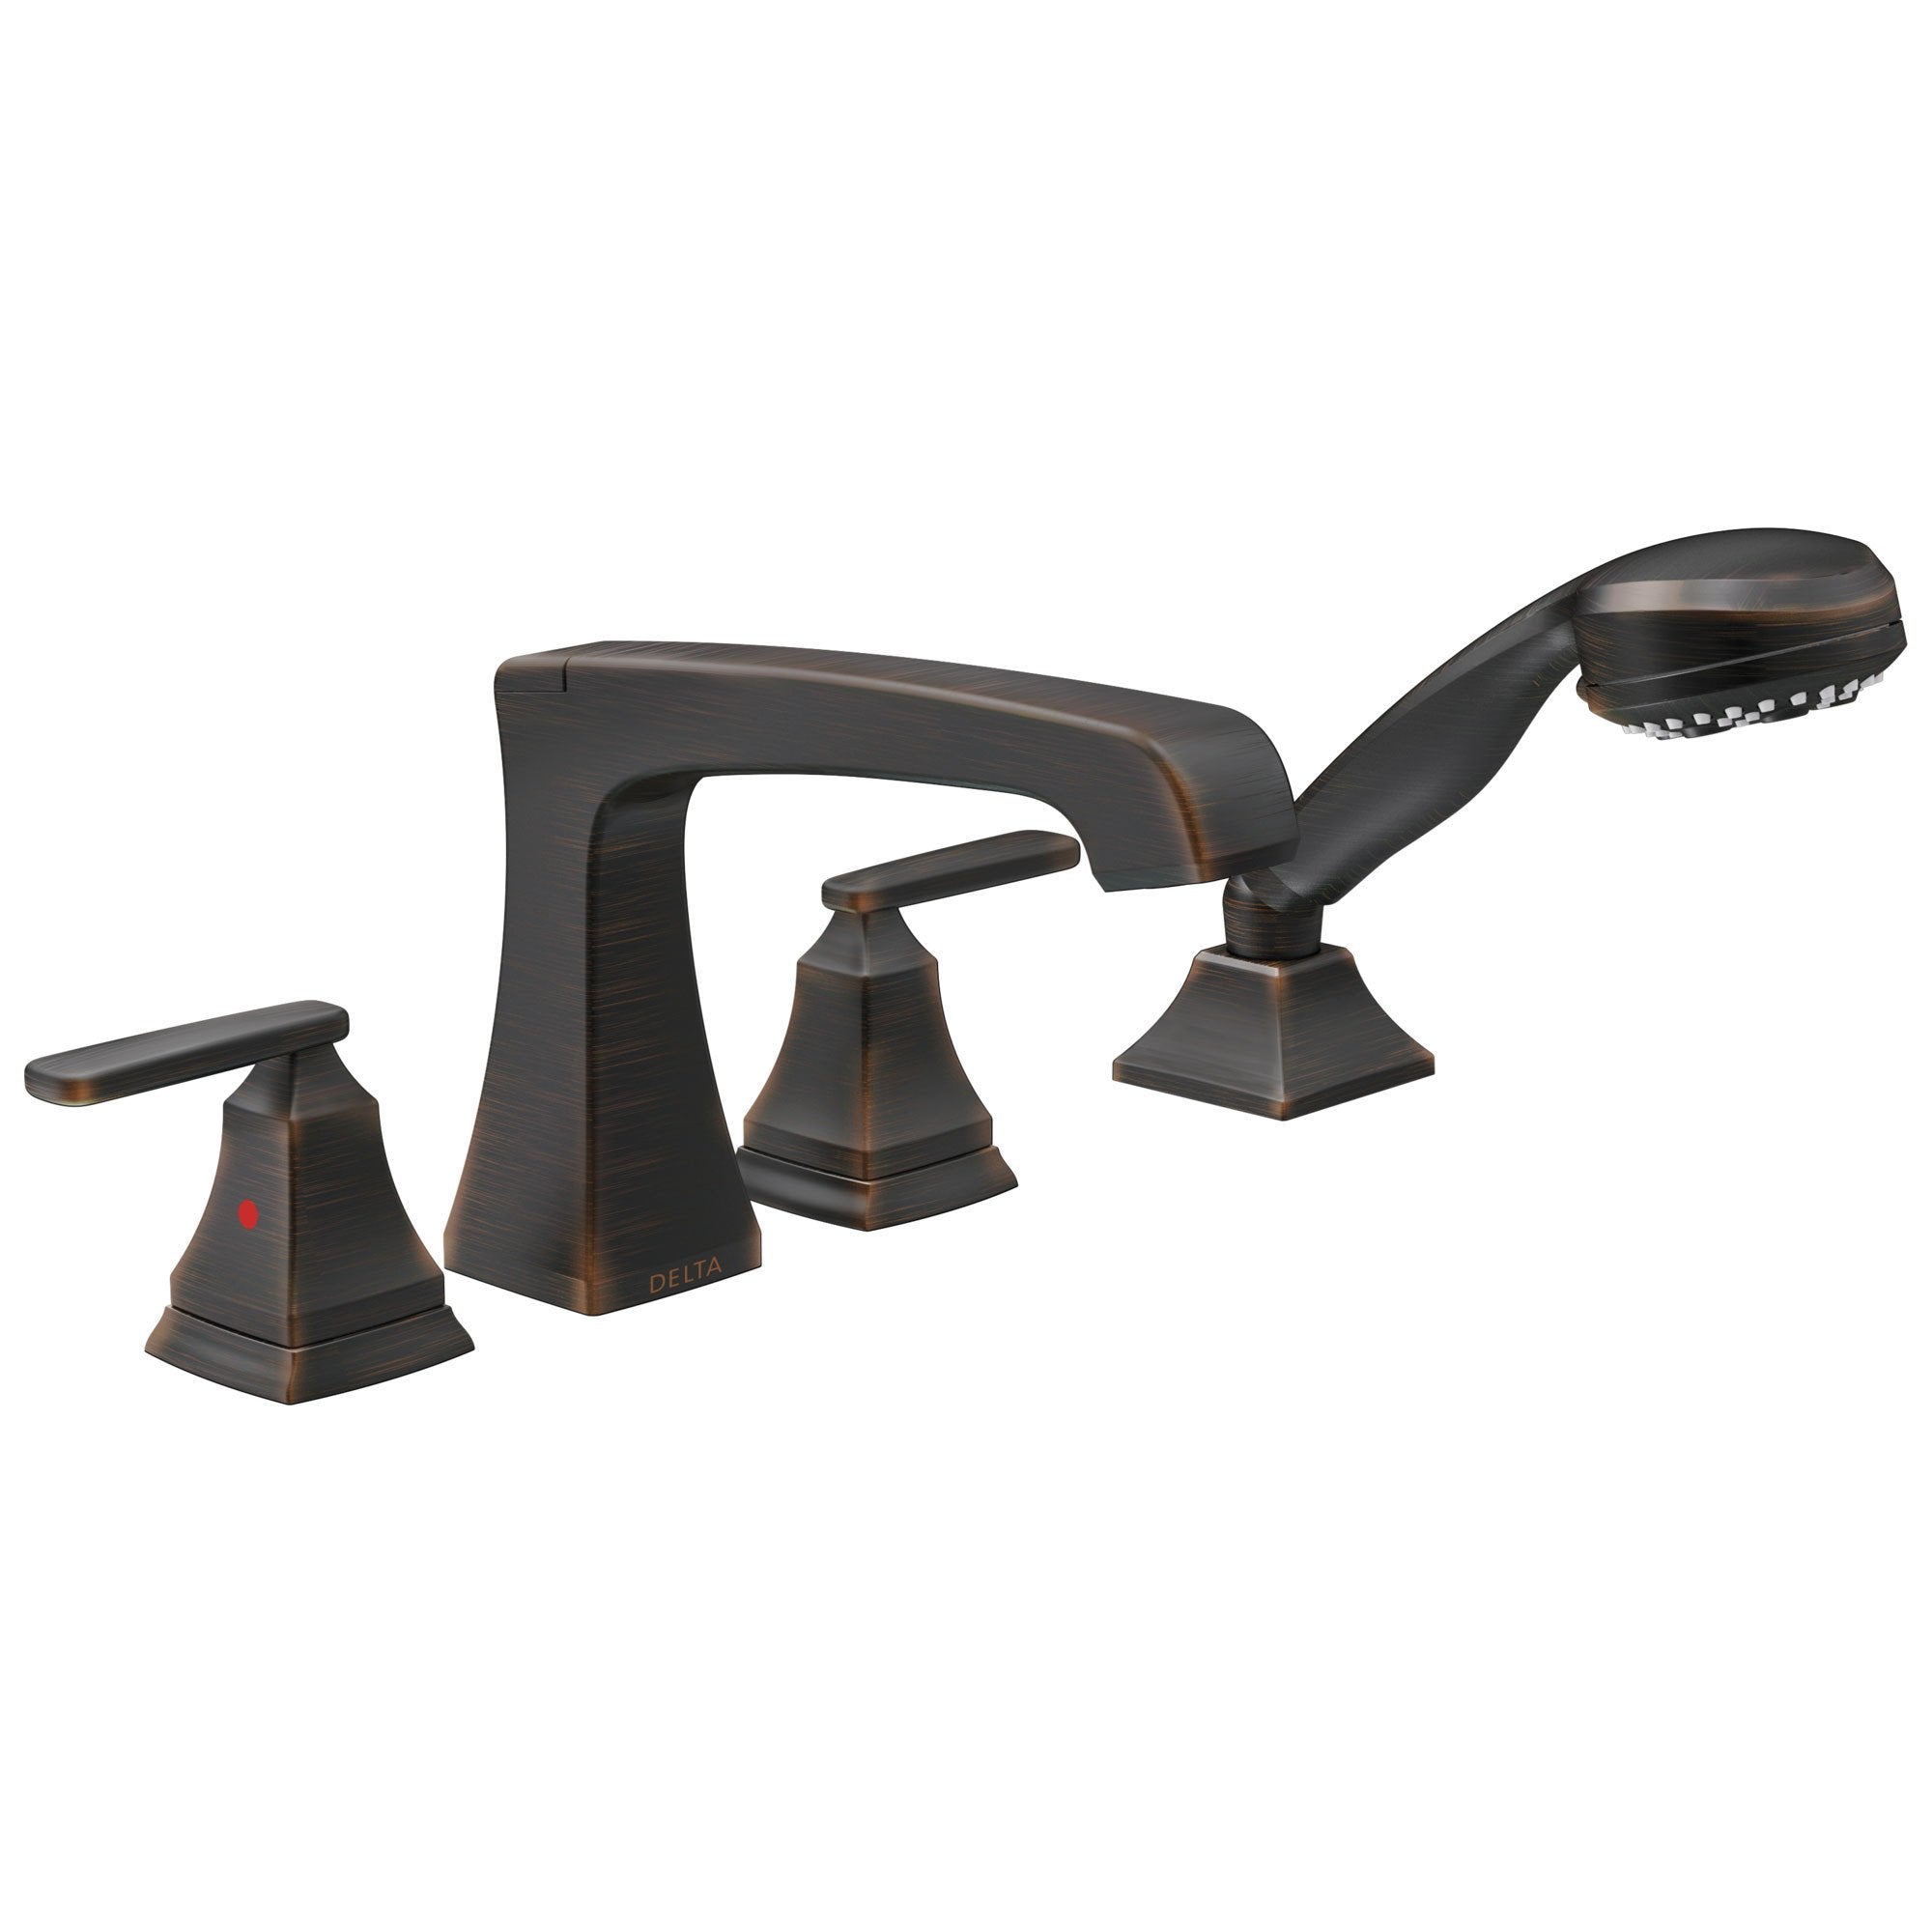 Delta Ashlyn Collection Venetian Bronze Finish High Flow Roman Bath Tub Filler Faucet Trim with Hand Shower Sprayer (Requires Rough-in Valve) DT4764RB